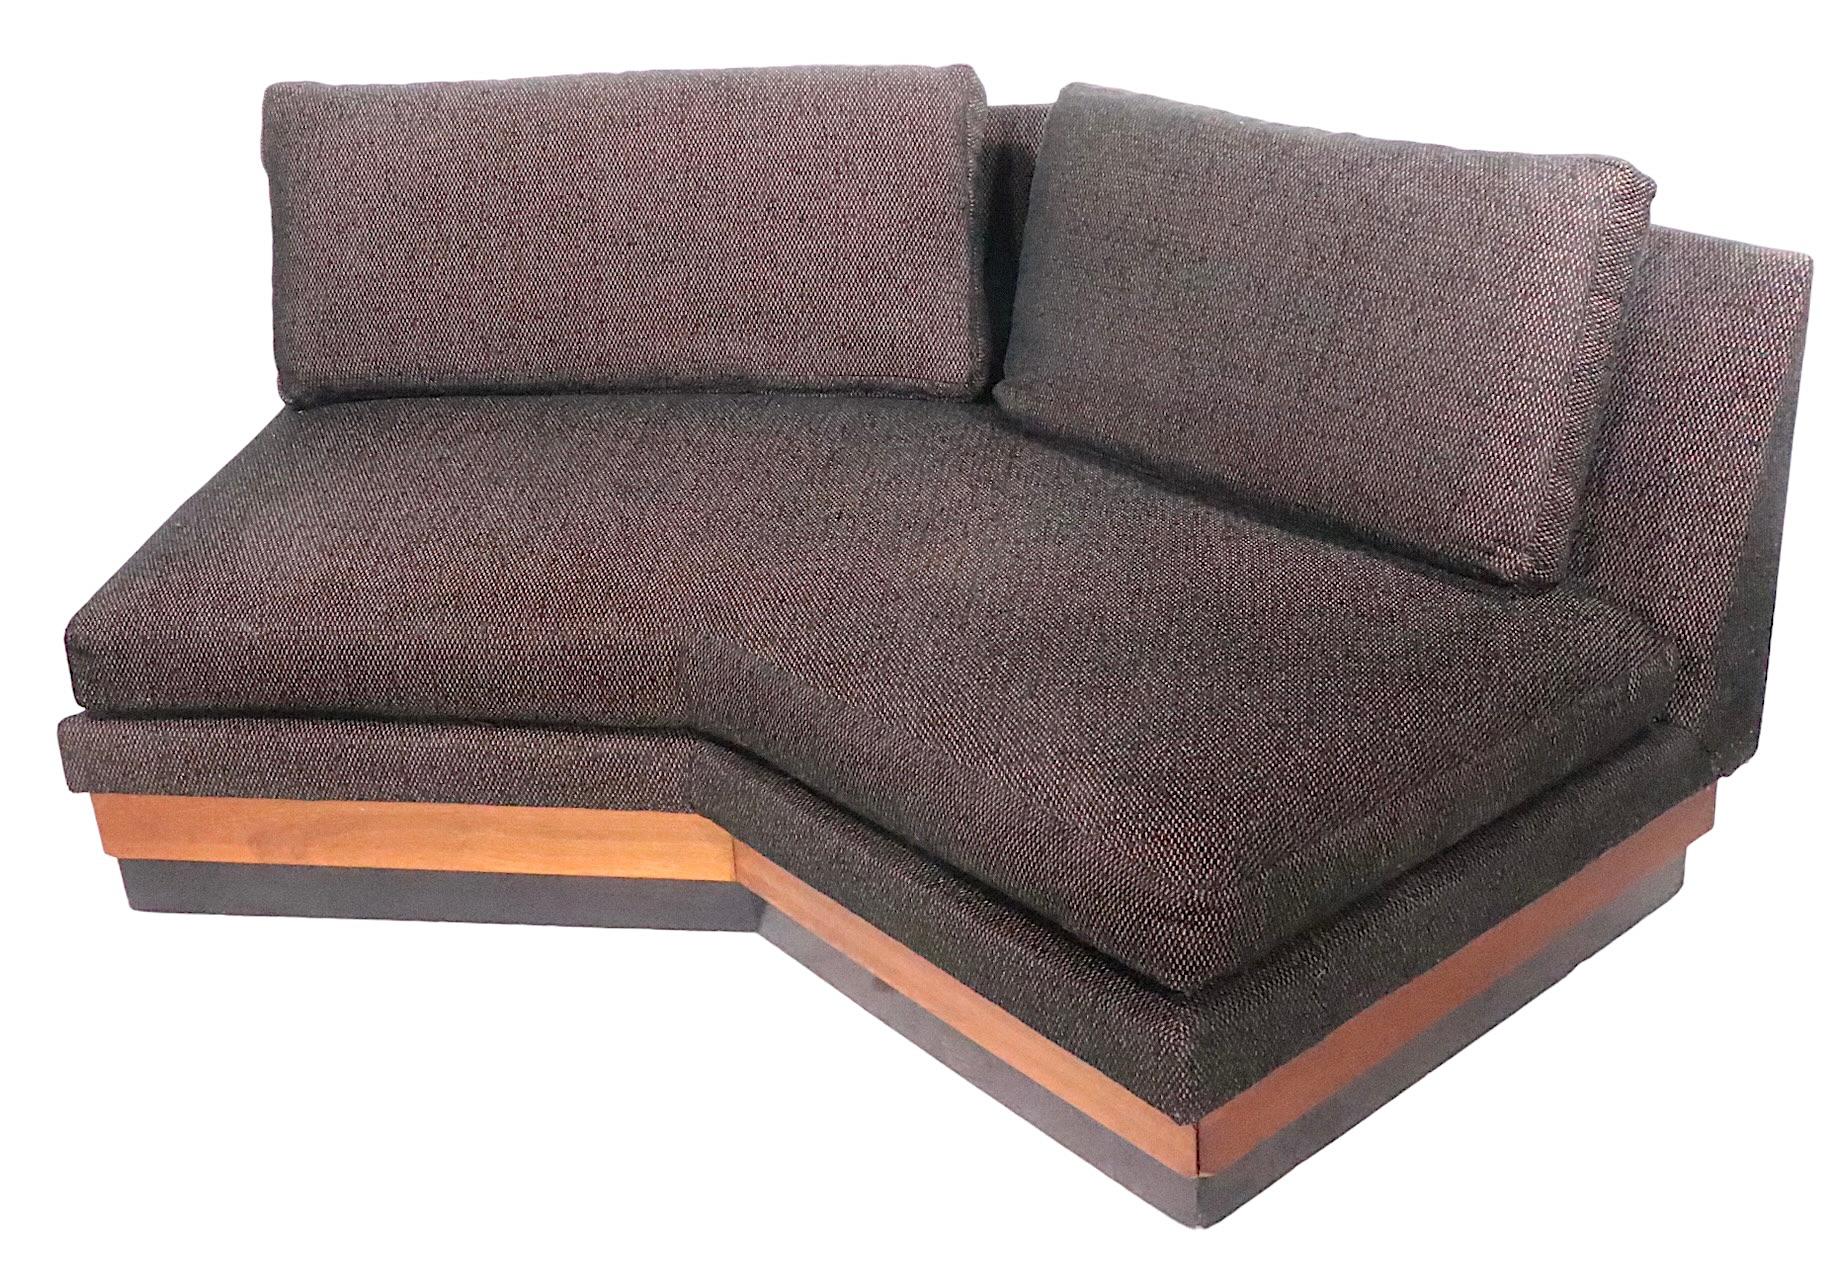 adrian pearsall sectional